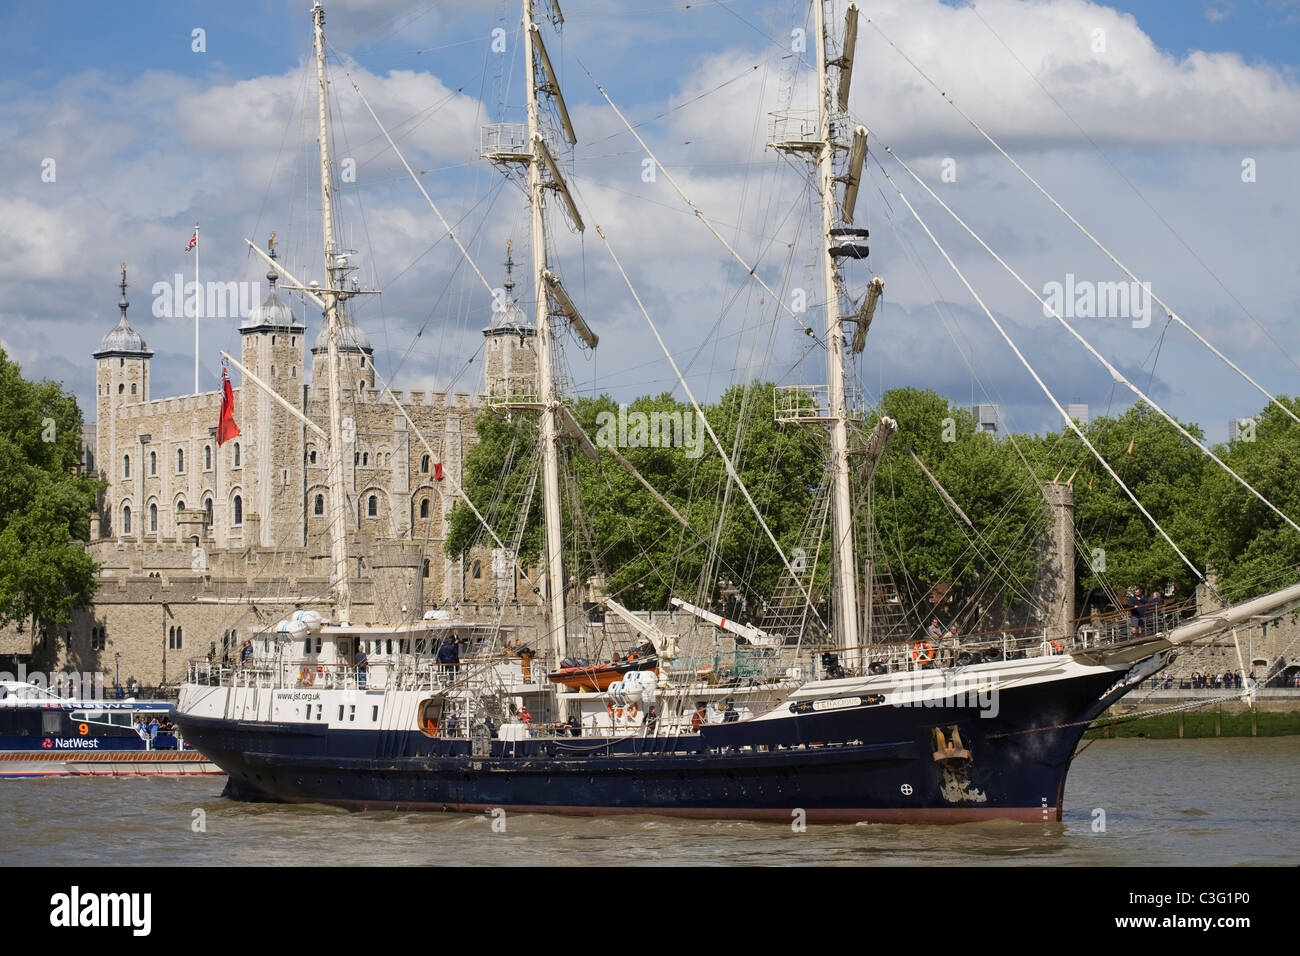 tall ship SV Tenacious the tower of London in the background Jubilee Sailing Trust sailing ship Stock Photo